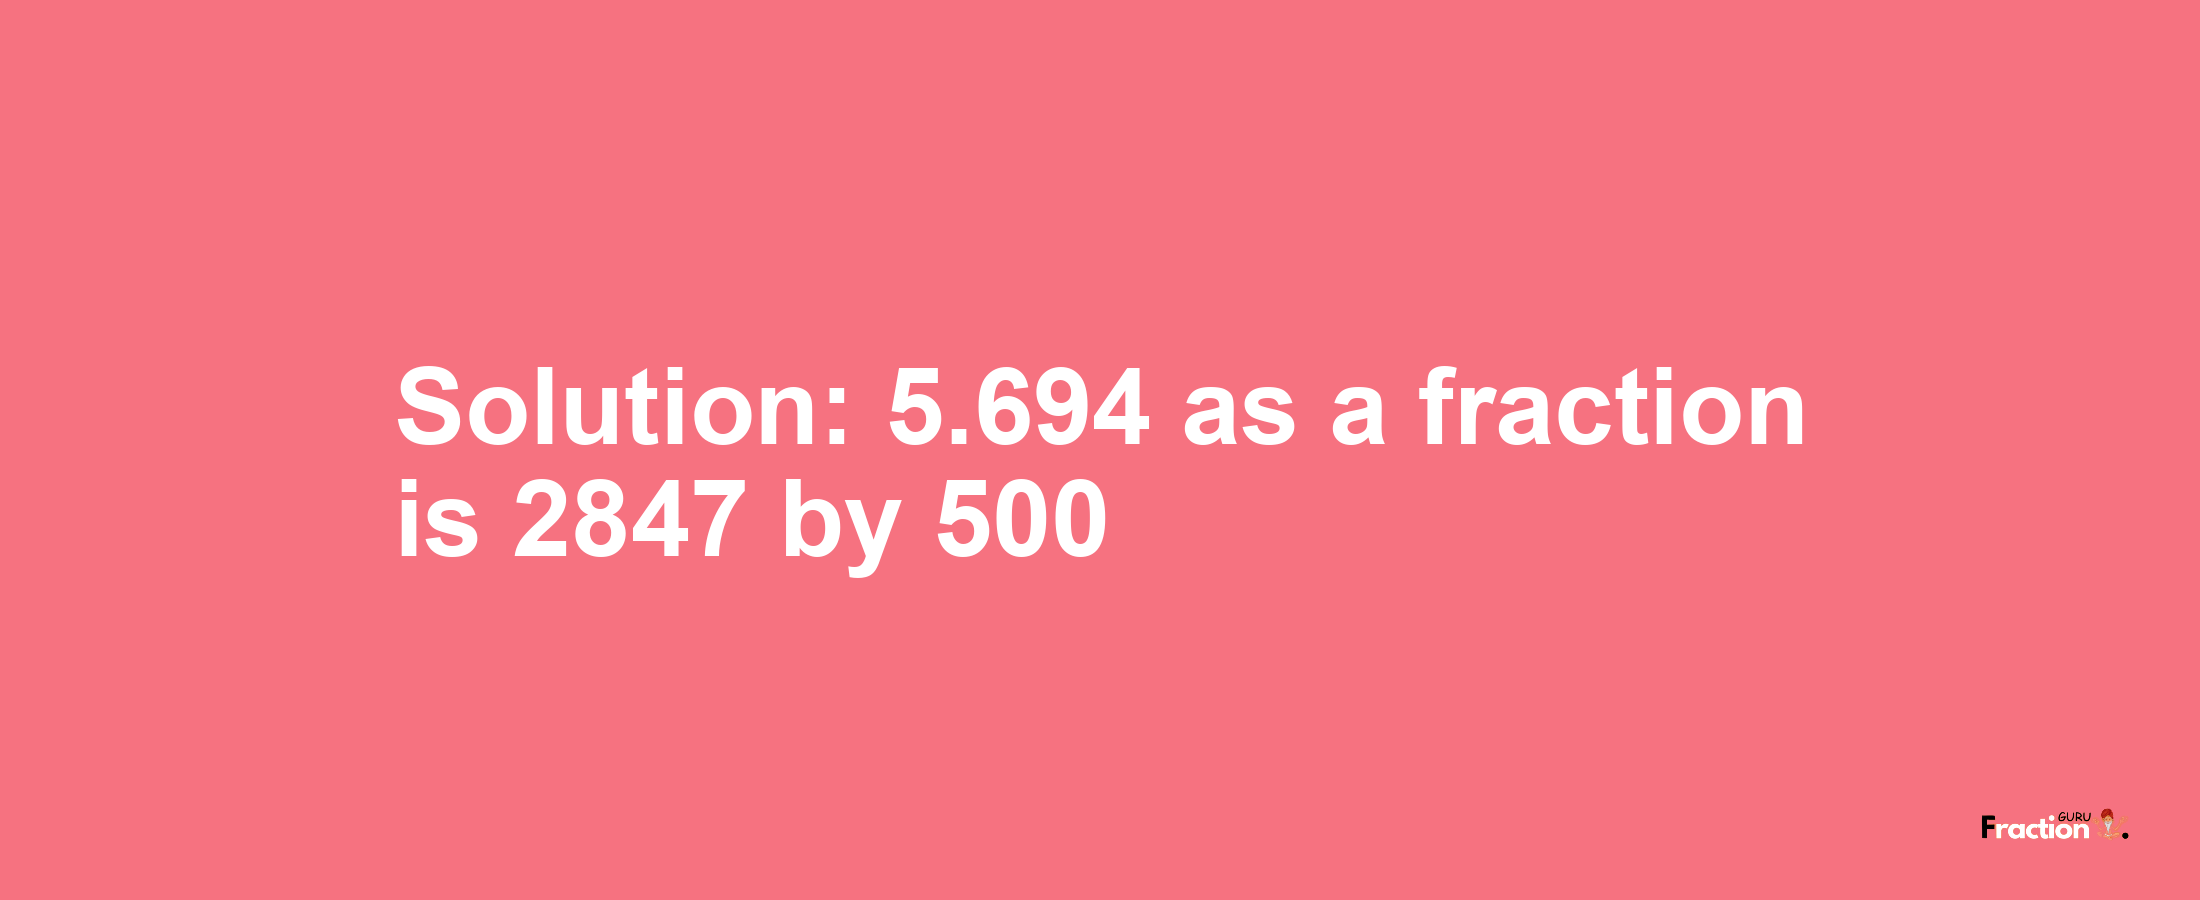 Solution:5.694 as a fraction is 2847/500